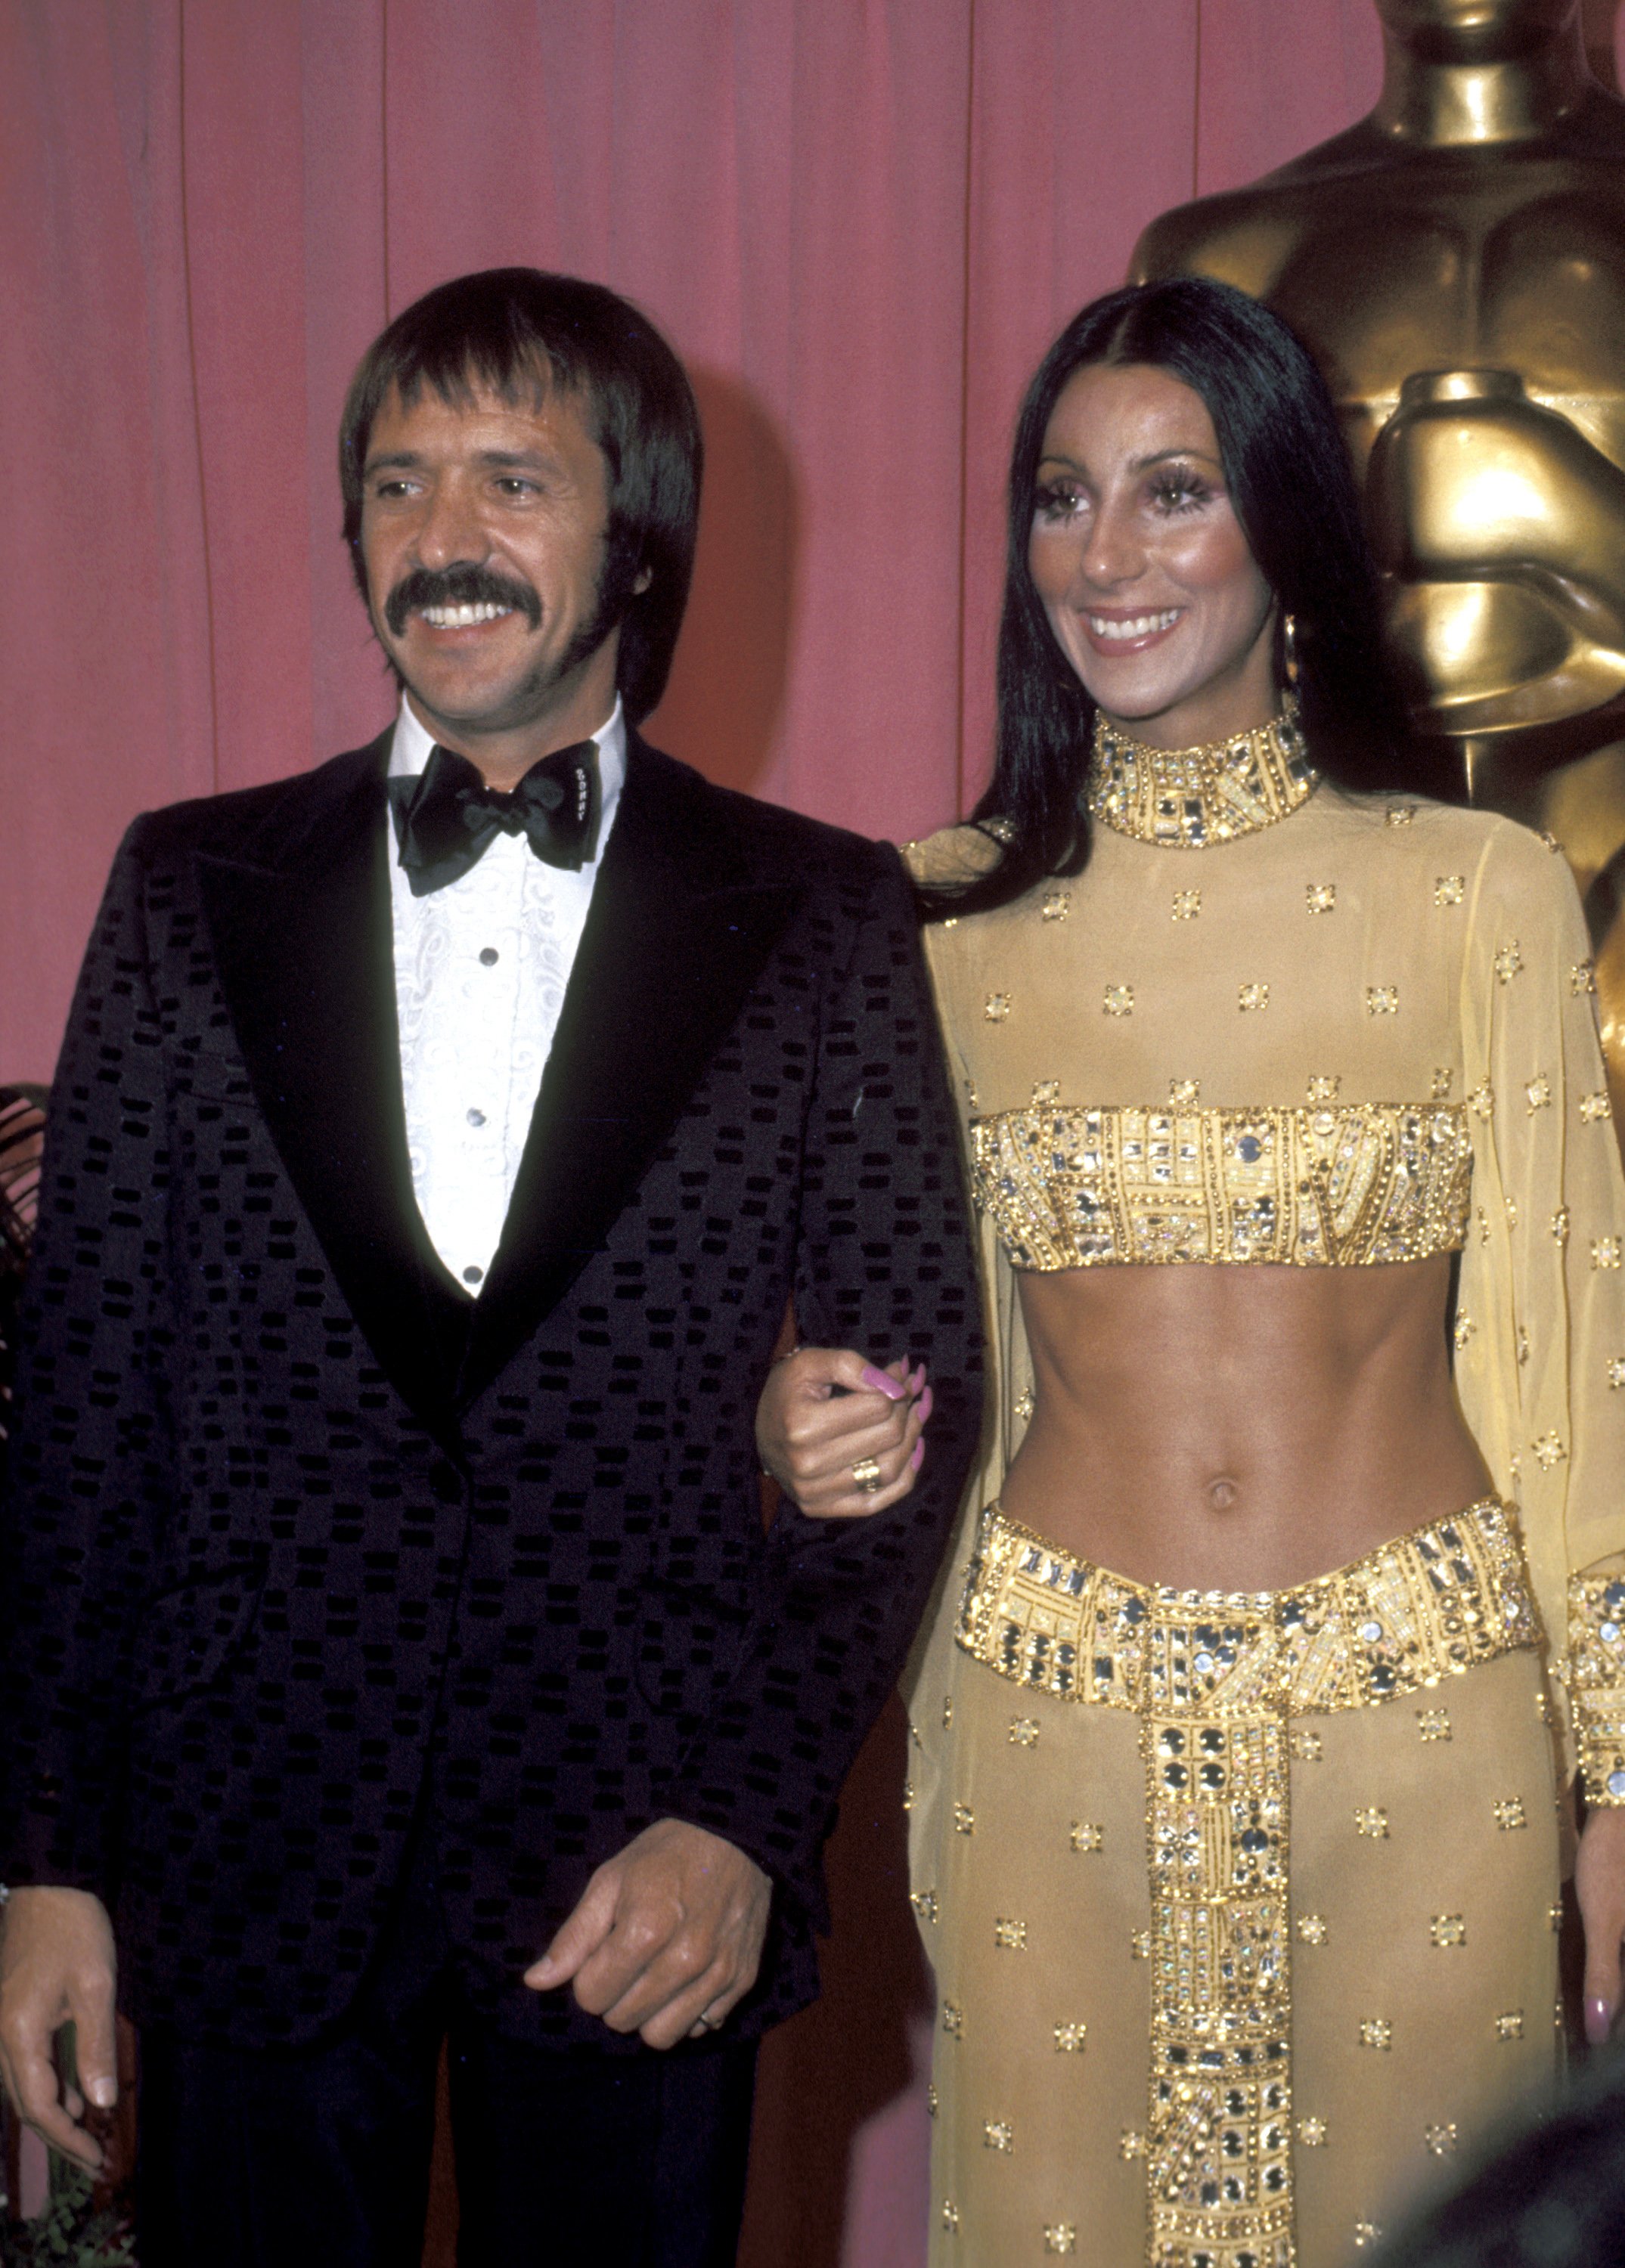 Sonny Bono And Cher at the 45th Annual Academy Awards at Dorothy Chandler Pavilion Los Angeles, California, March 27, 1973 | Source: Getty Images